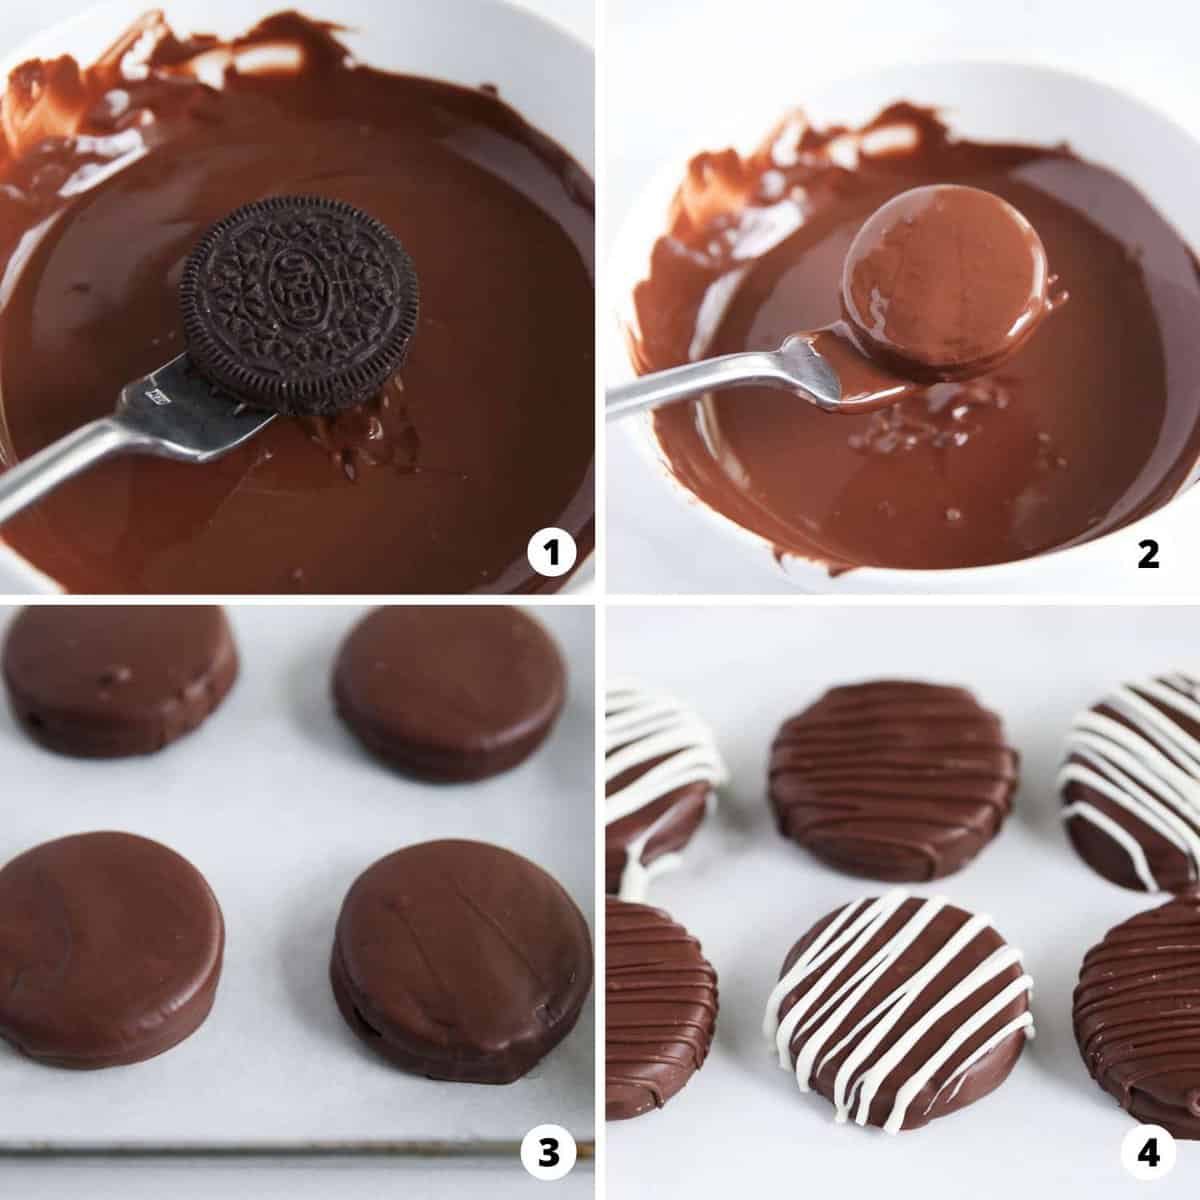 Showing how to make chocolate covered oreos in a 4 step collage.